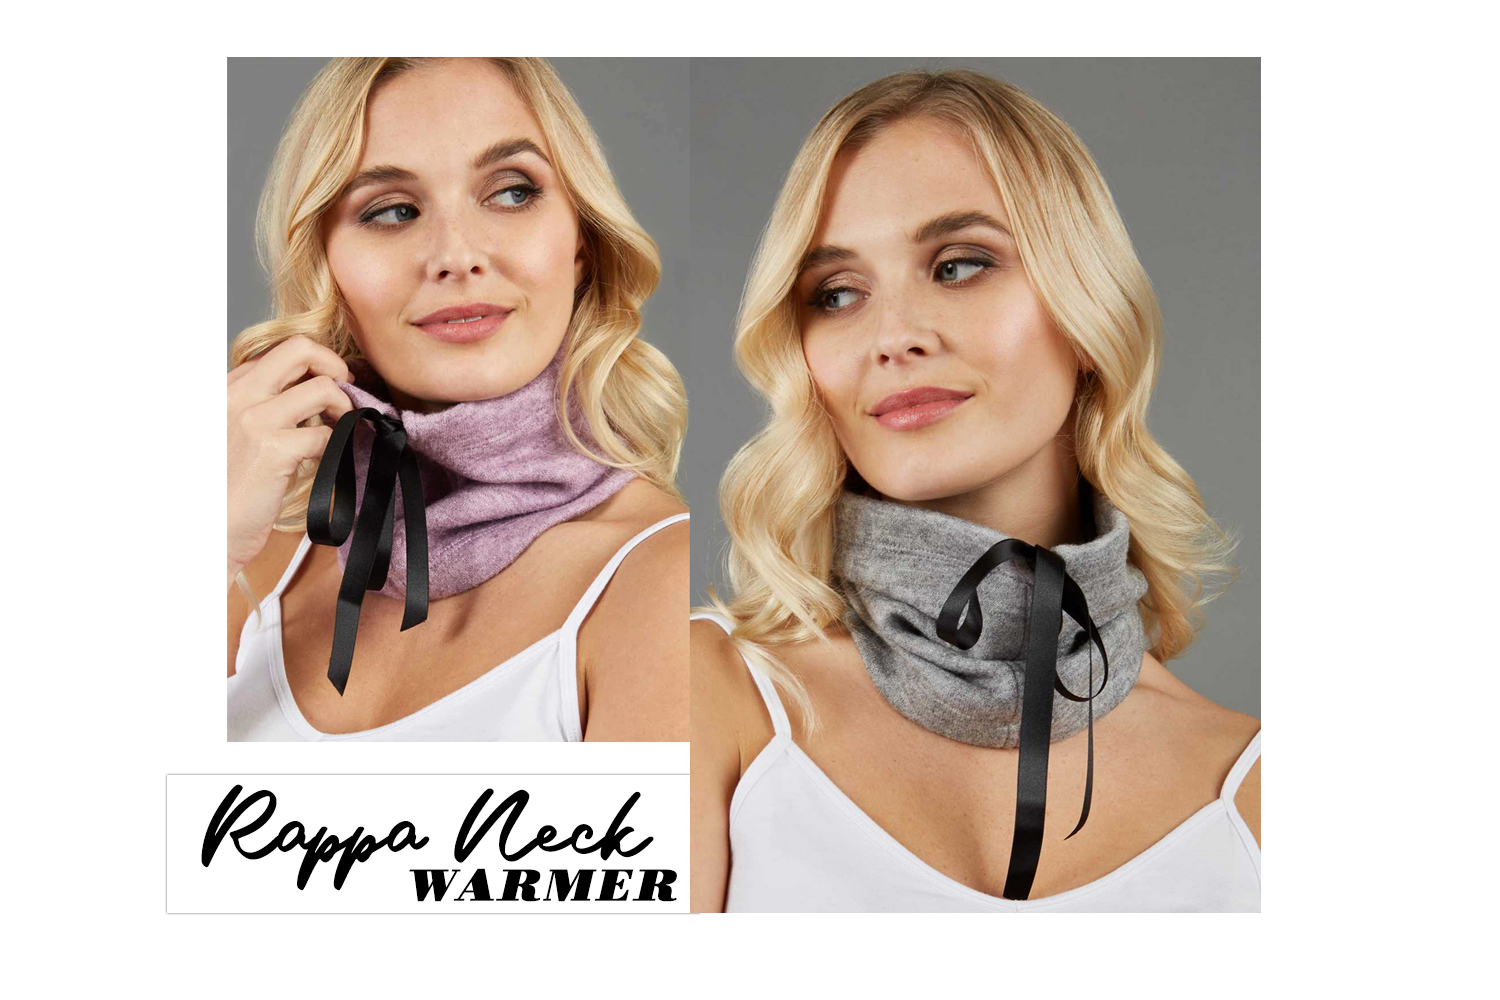 two images combined into one edit, of a model wearing the rappa neck warmers in both grey and lavender.